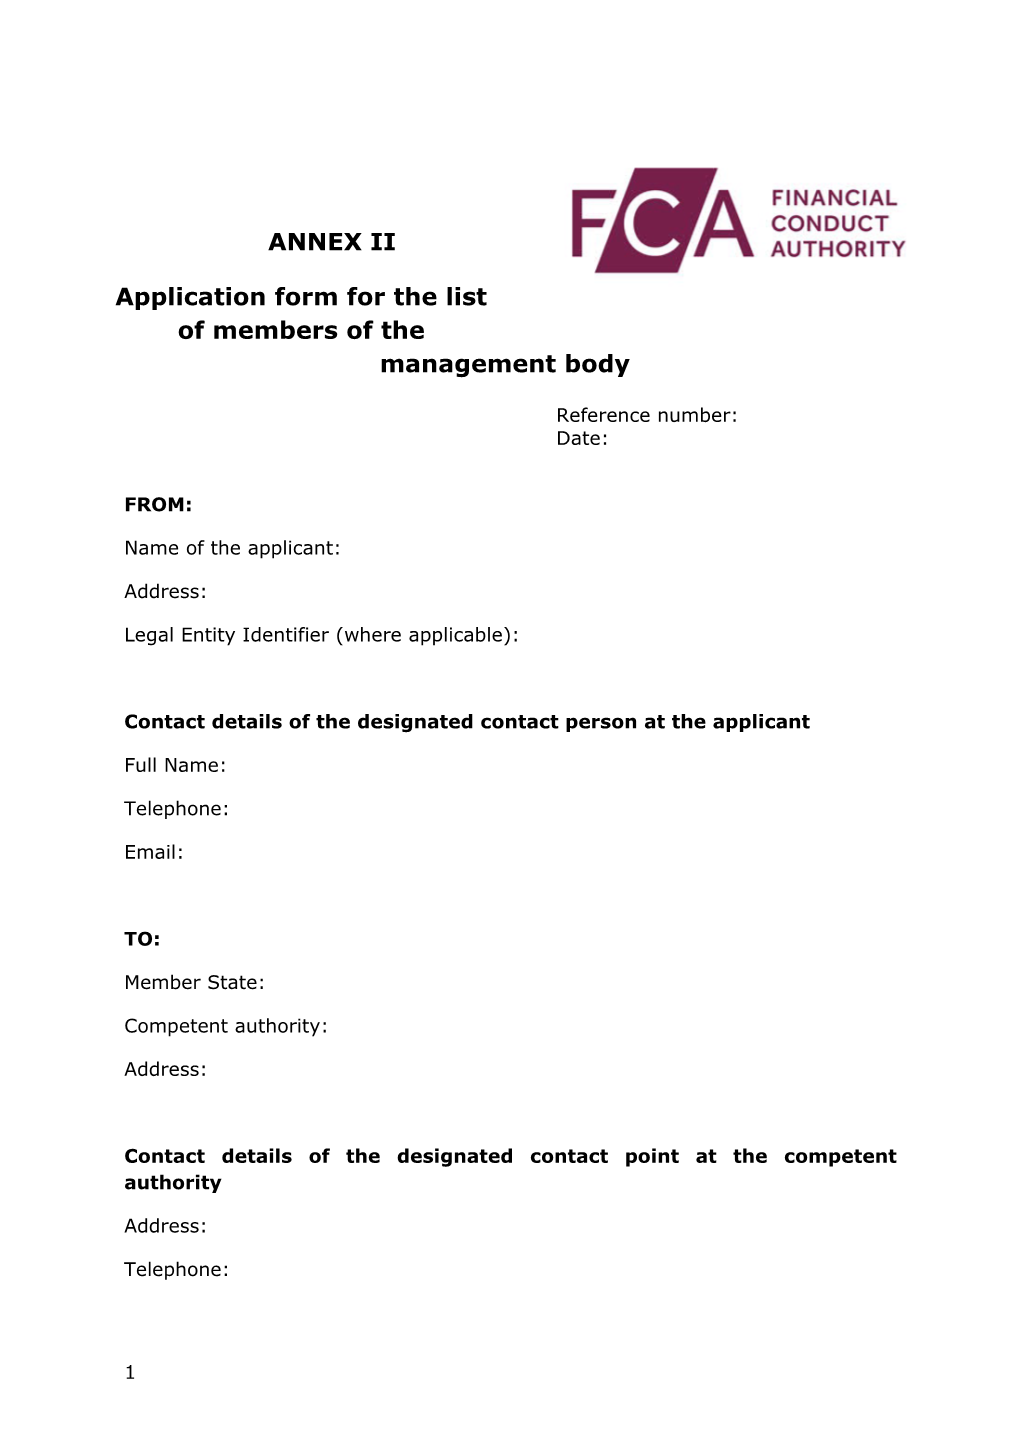 Application Form for the List of Members of the Management Body